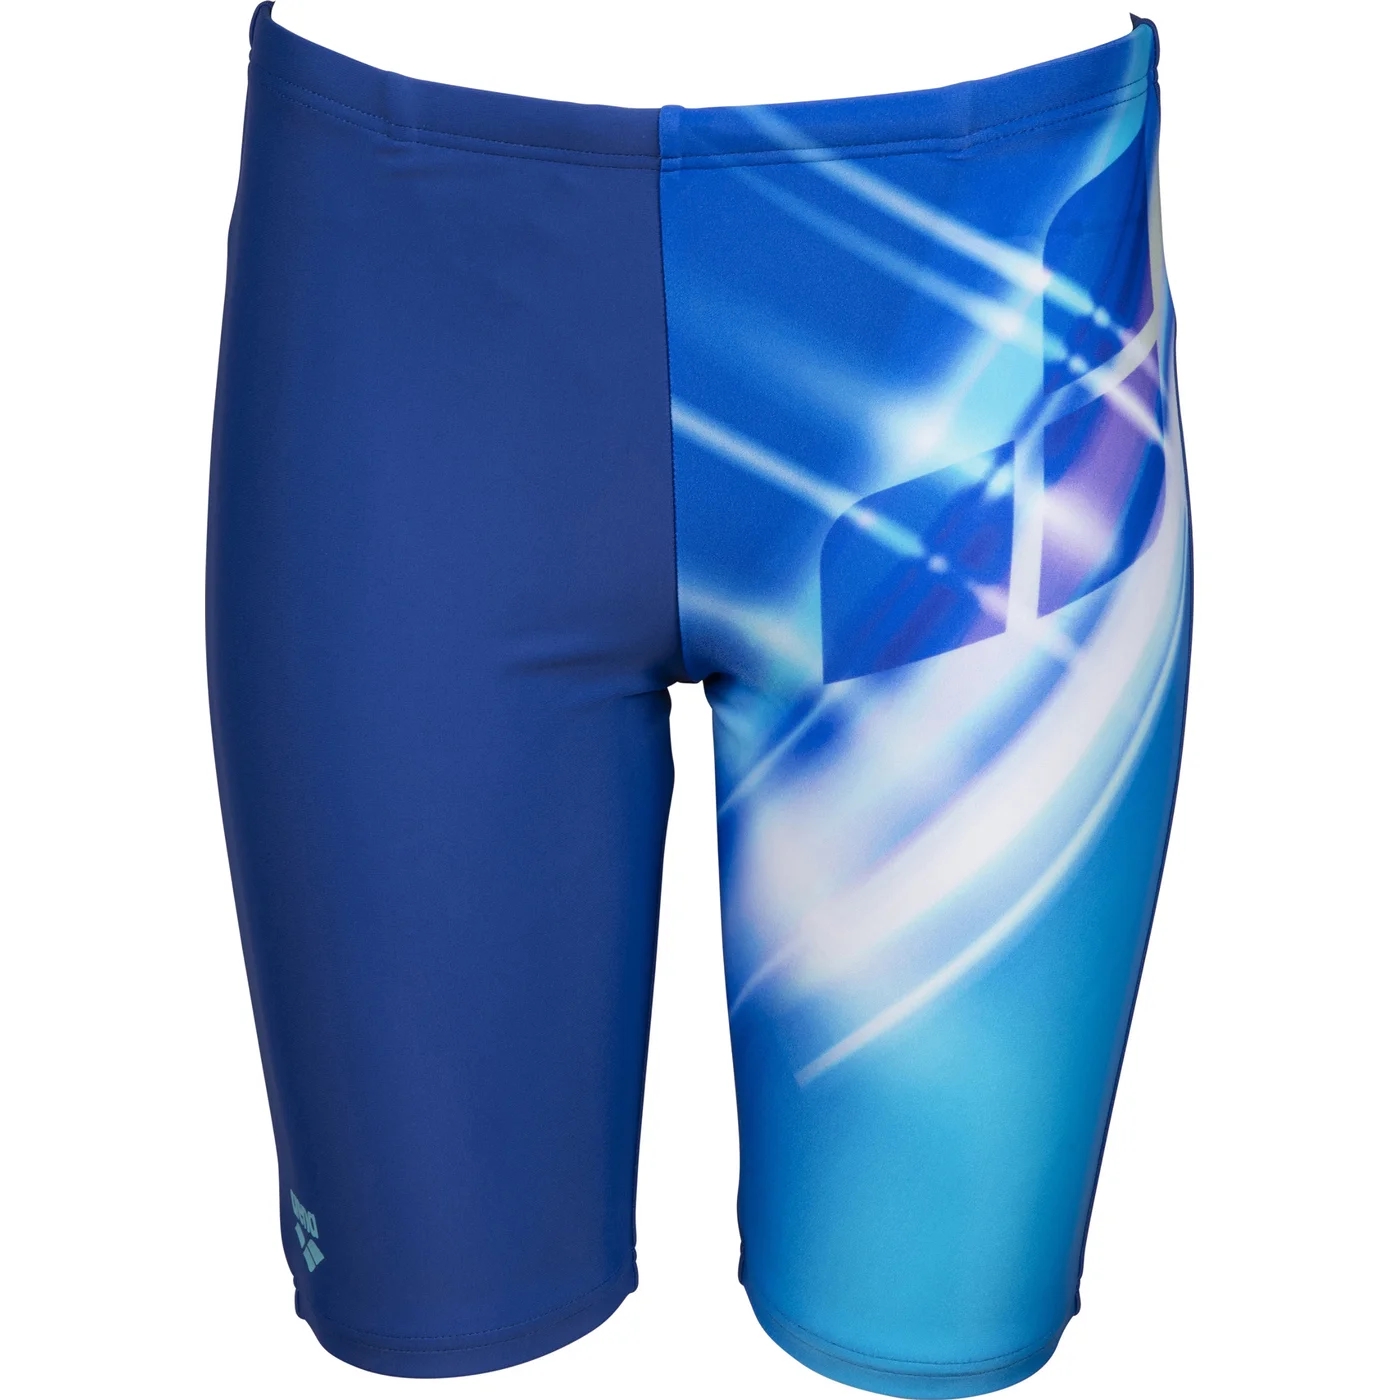 ARENA ARENA JUNGEN BADEHOSE JAMMER CHEERY ROYAL-MULTI 4yhhQ8kQ